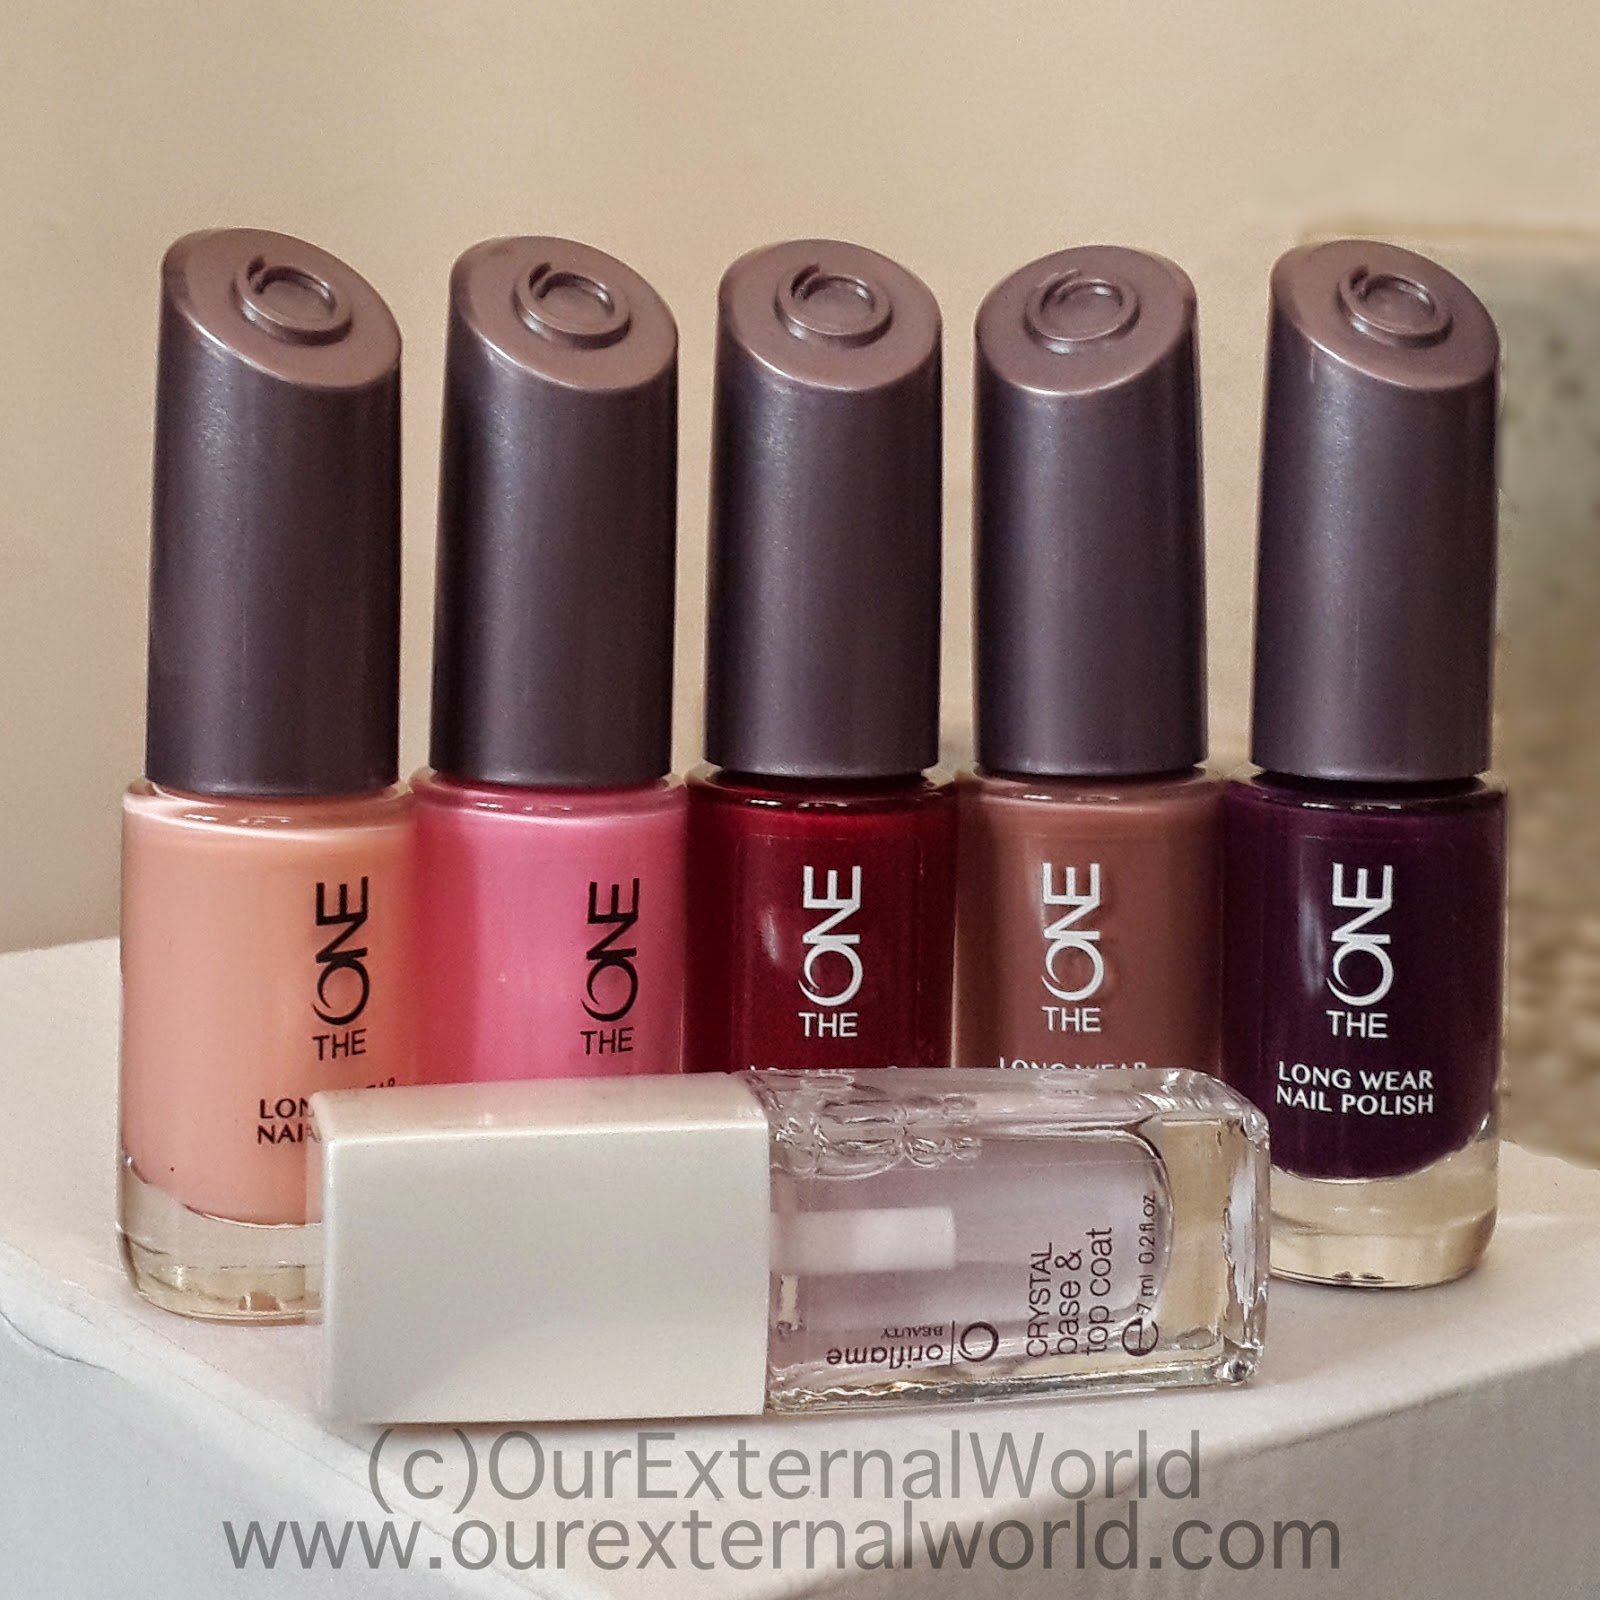 Oriflame TheOne Long Wear Nail Polish Swatches And Review